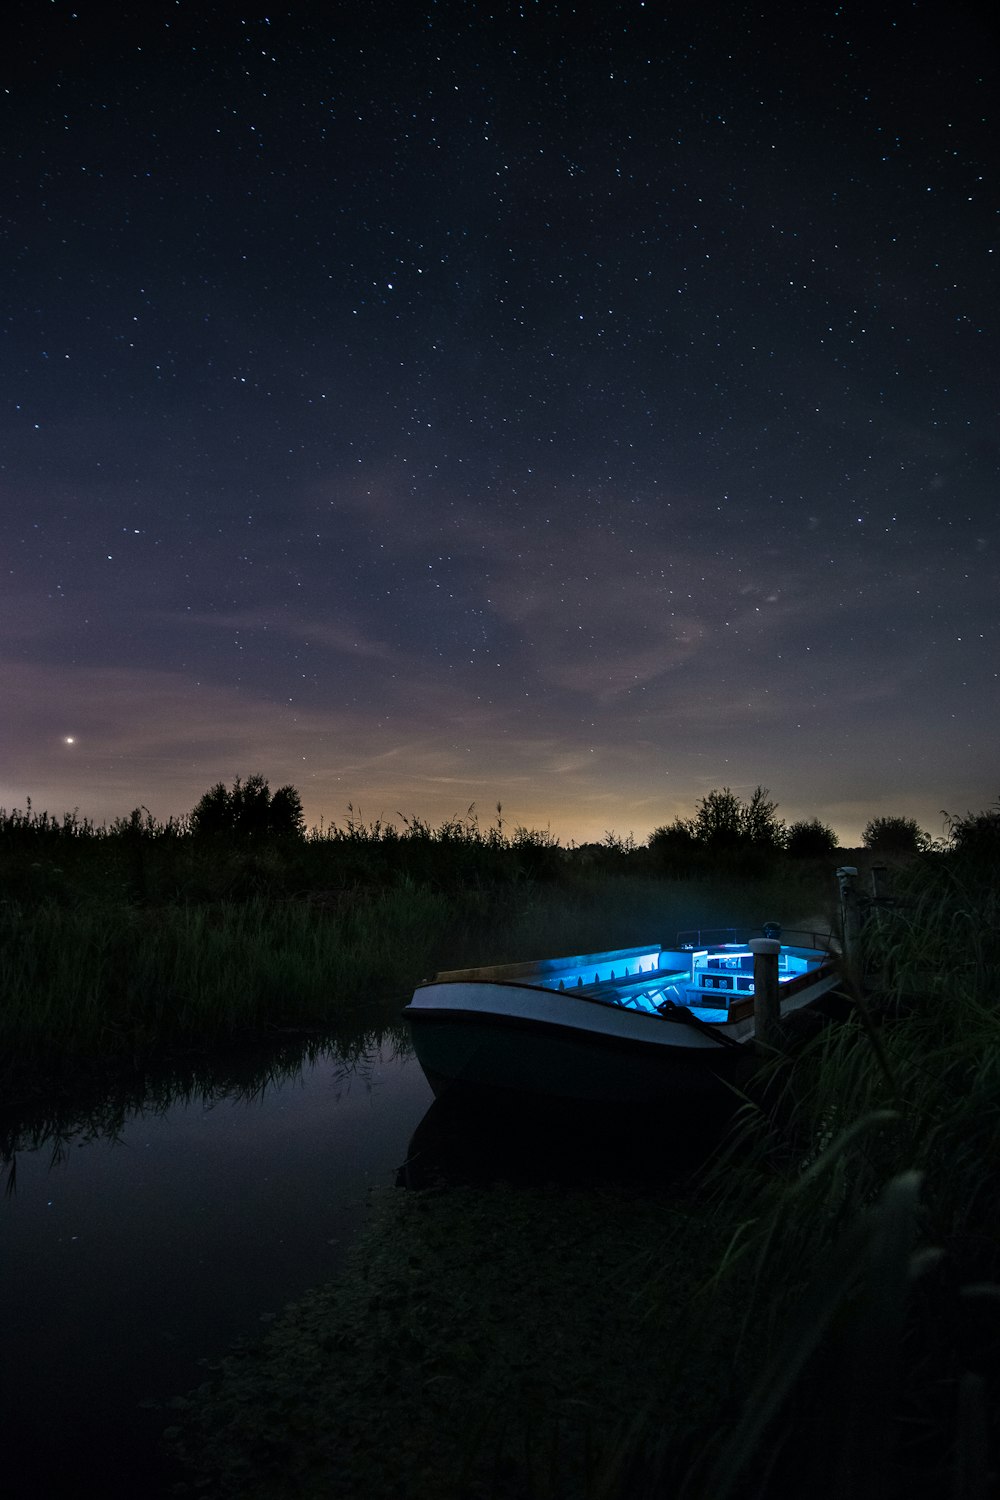 blue and white boat on river between trees at night